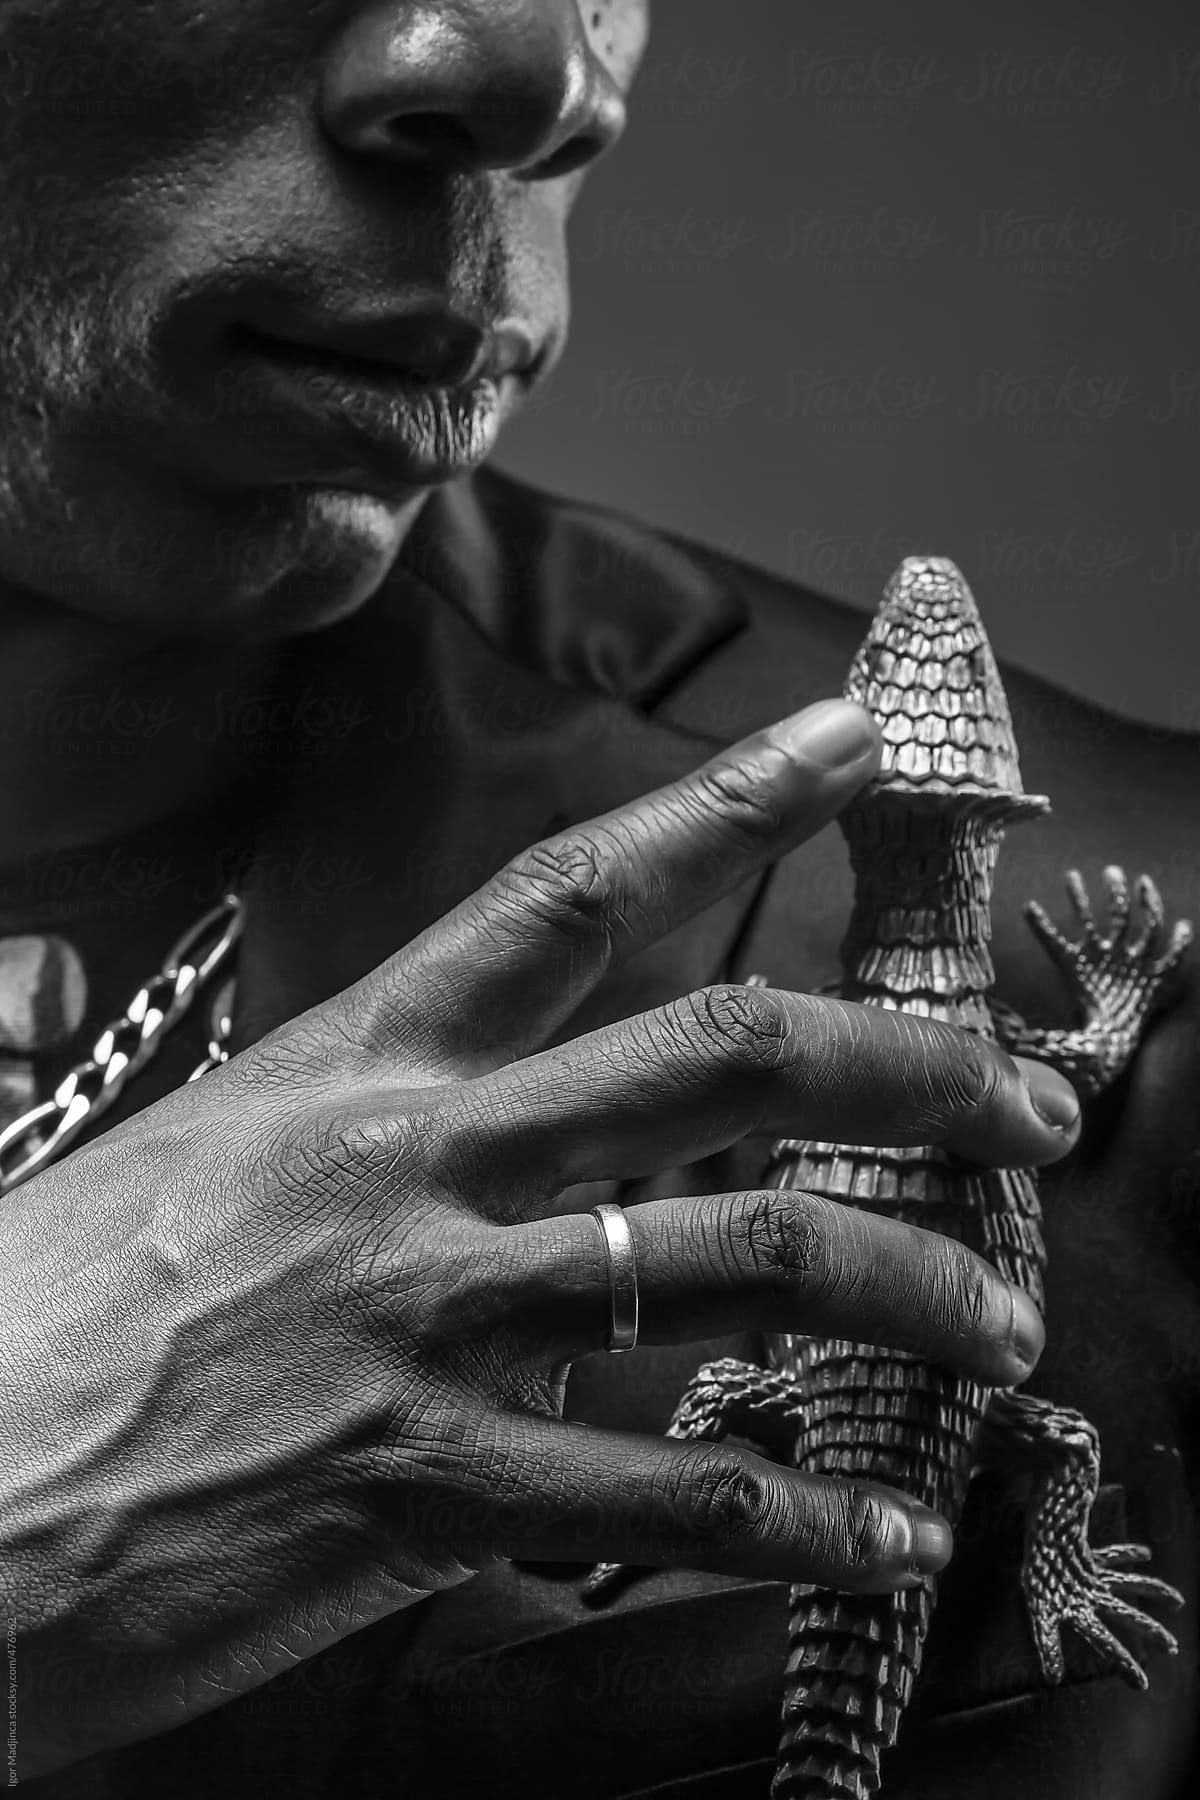 black man with a wedding ring on his hand holding a lizard toy , black and white